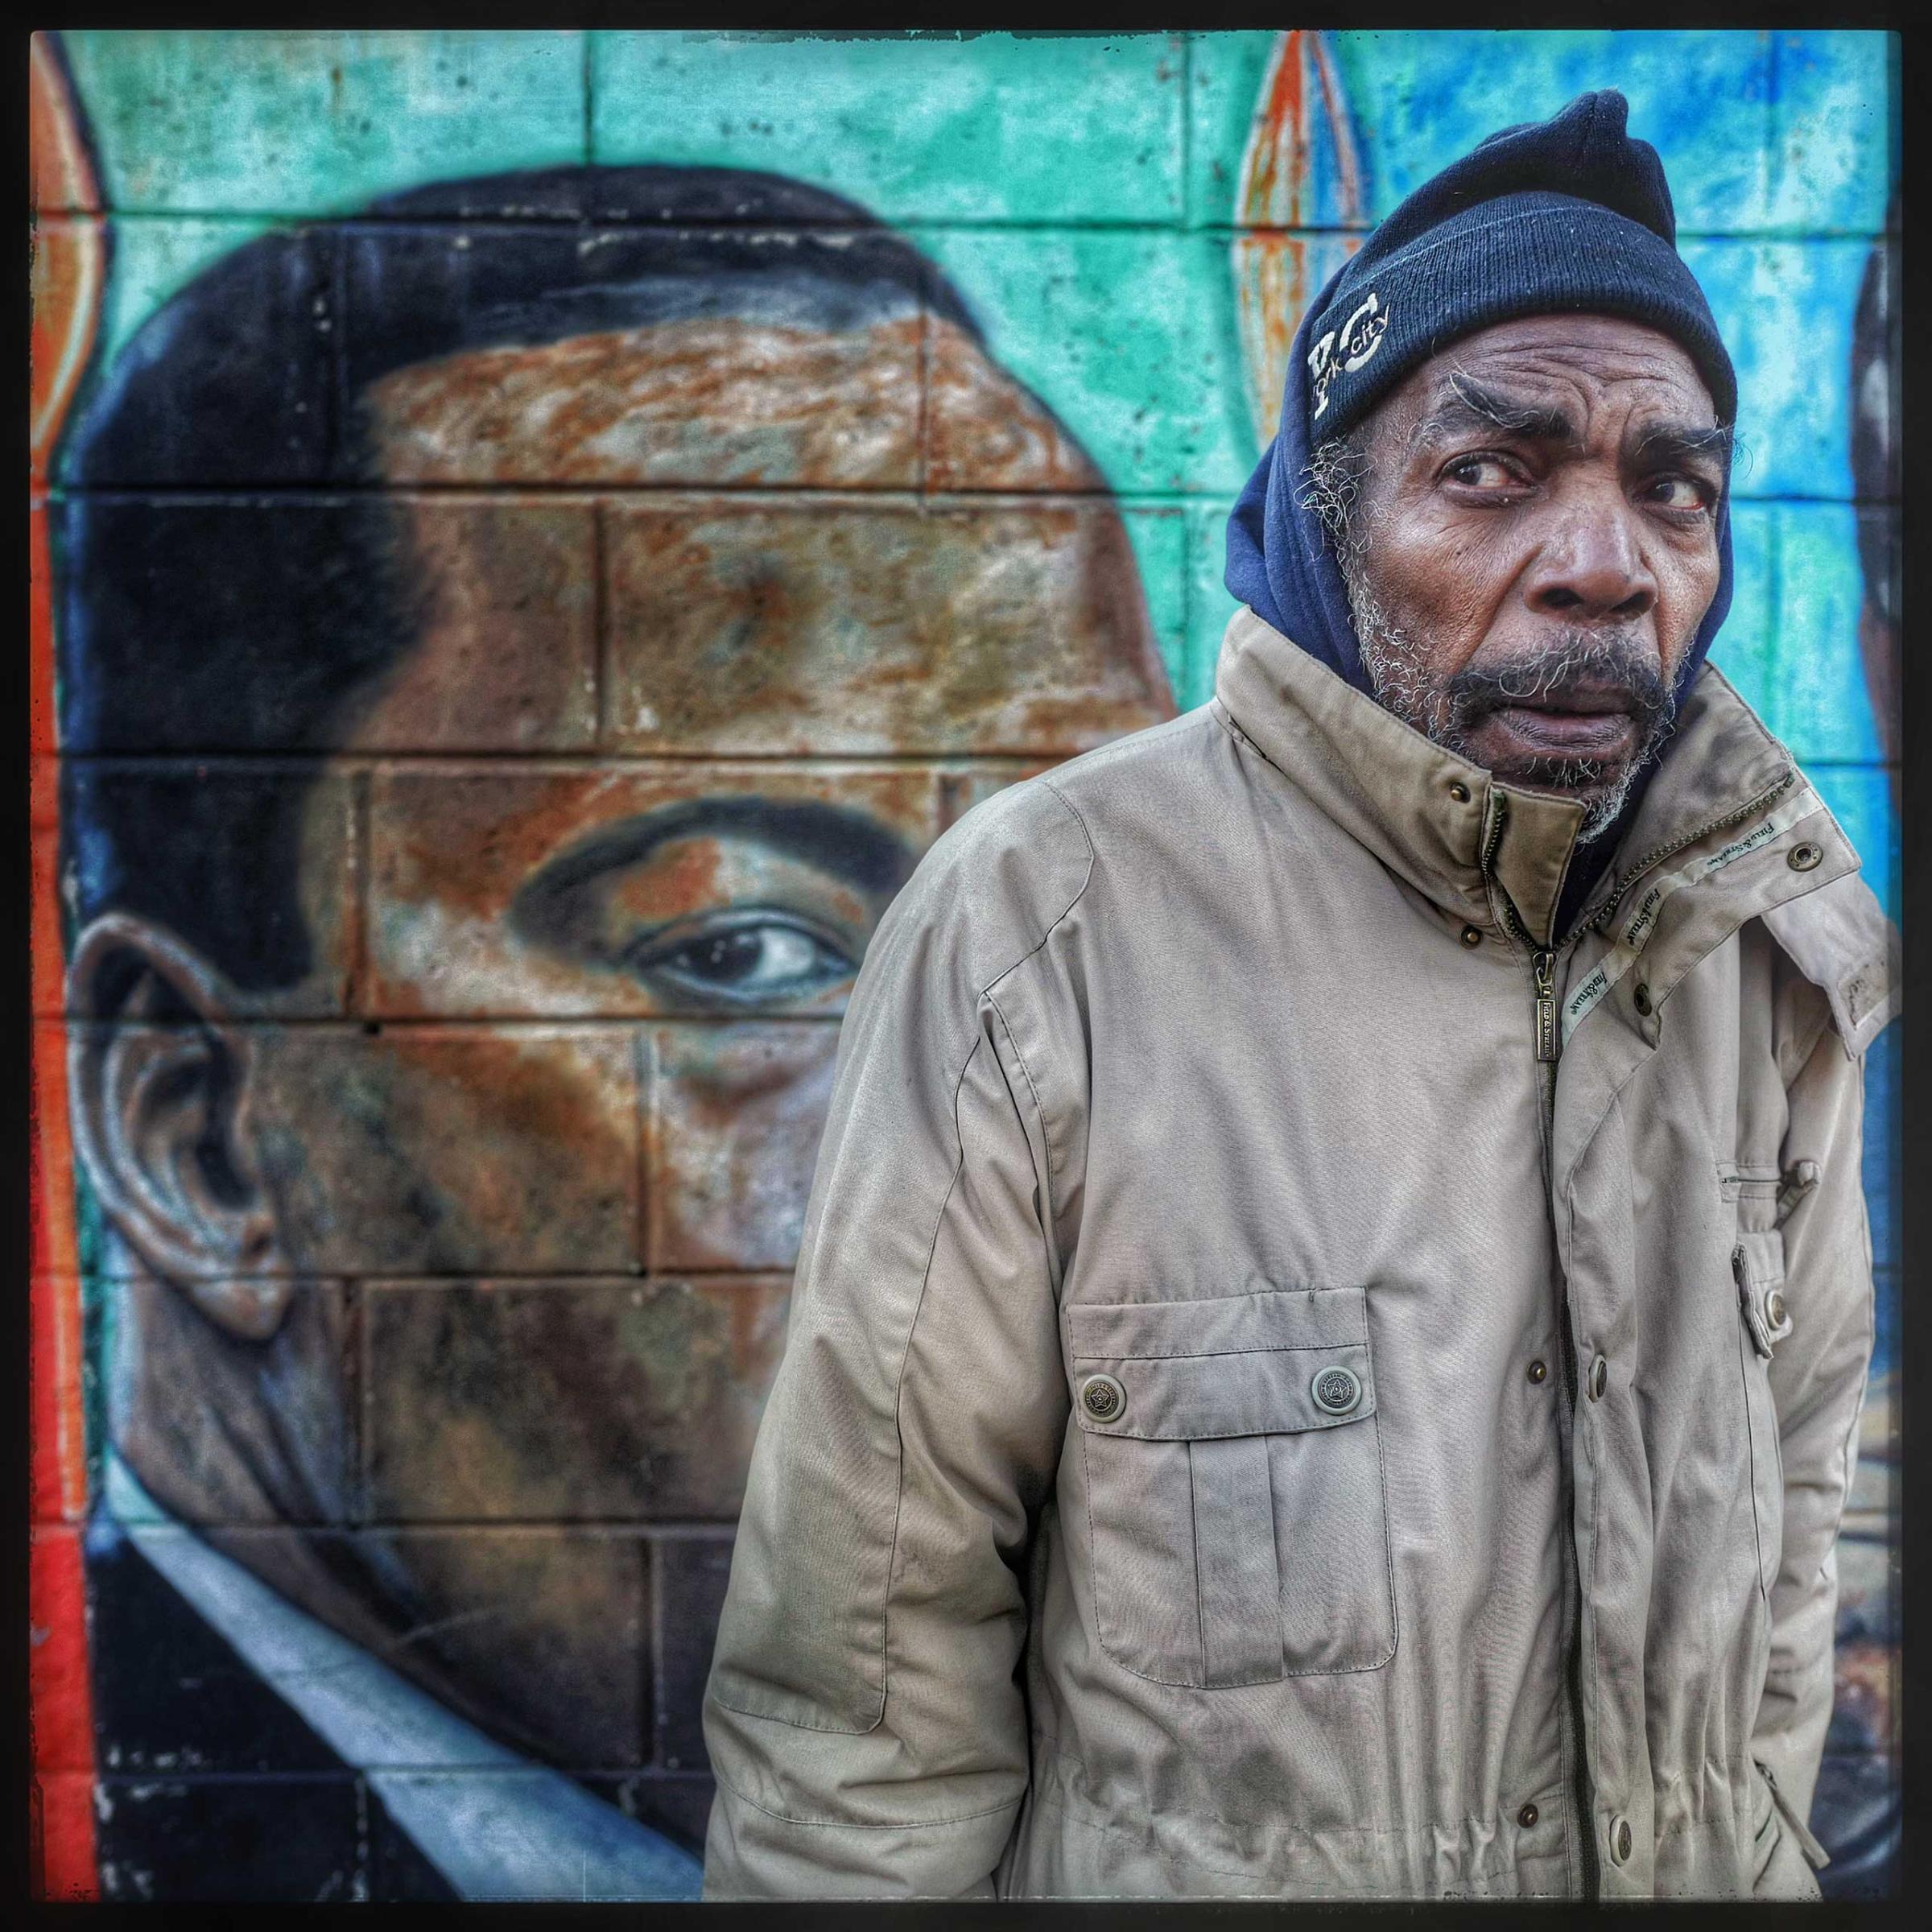 This bed stuy native was asked how he felt about the assassination of Dr. King. I asked if he remembered anything about the story when he was growing up. "I don't remember much about that day. I just can't remember but I still think he is still here." What do you mean, I asked, "We are still here aren't we, they haven't been able to kill us all yet."